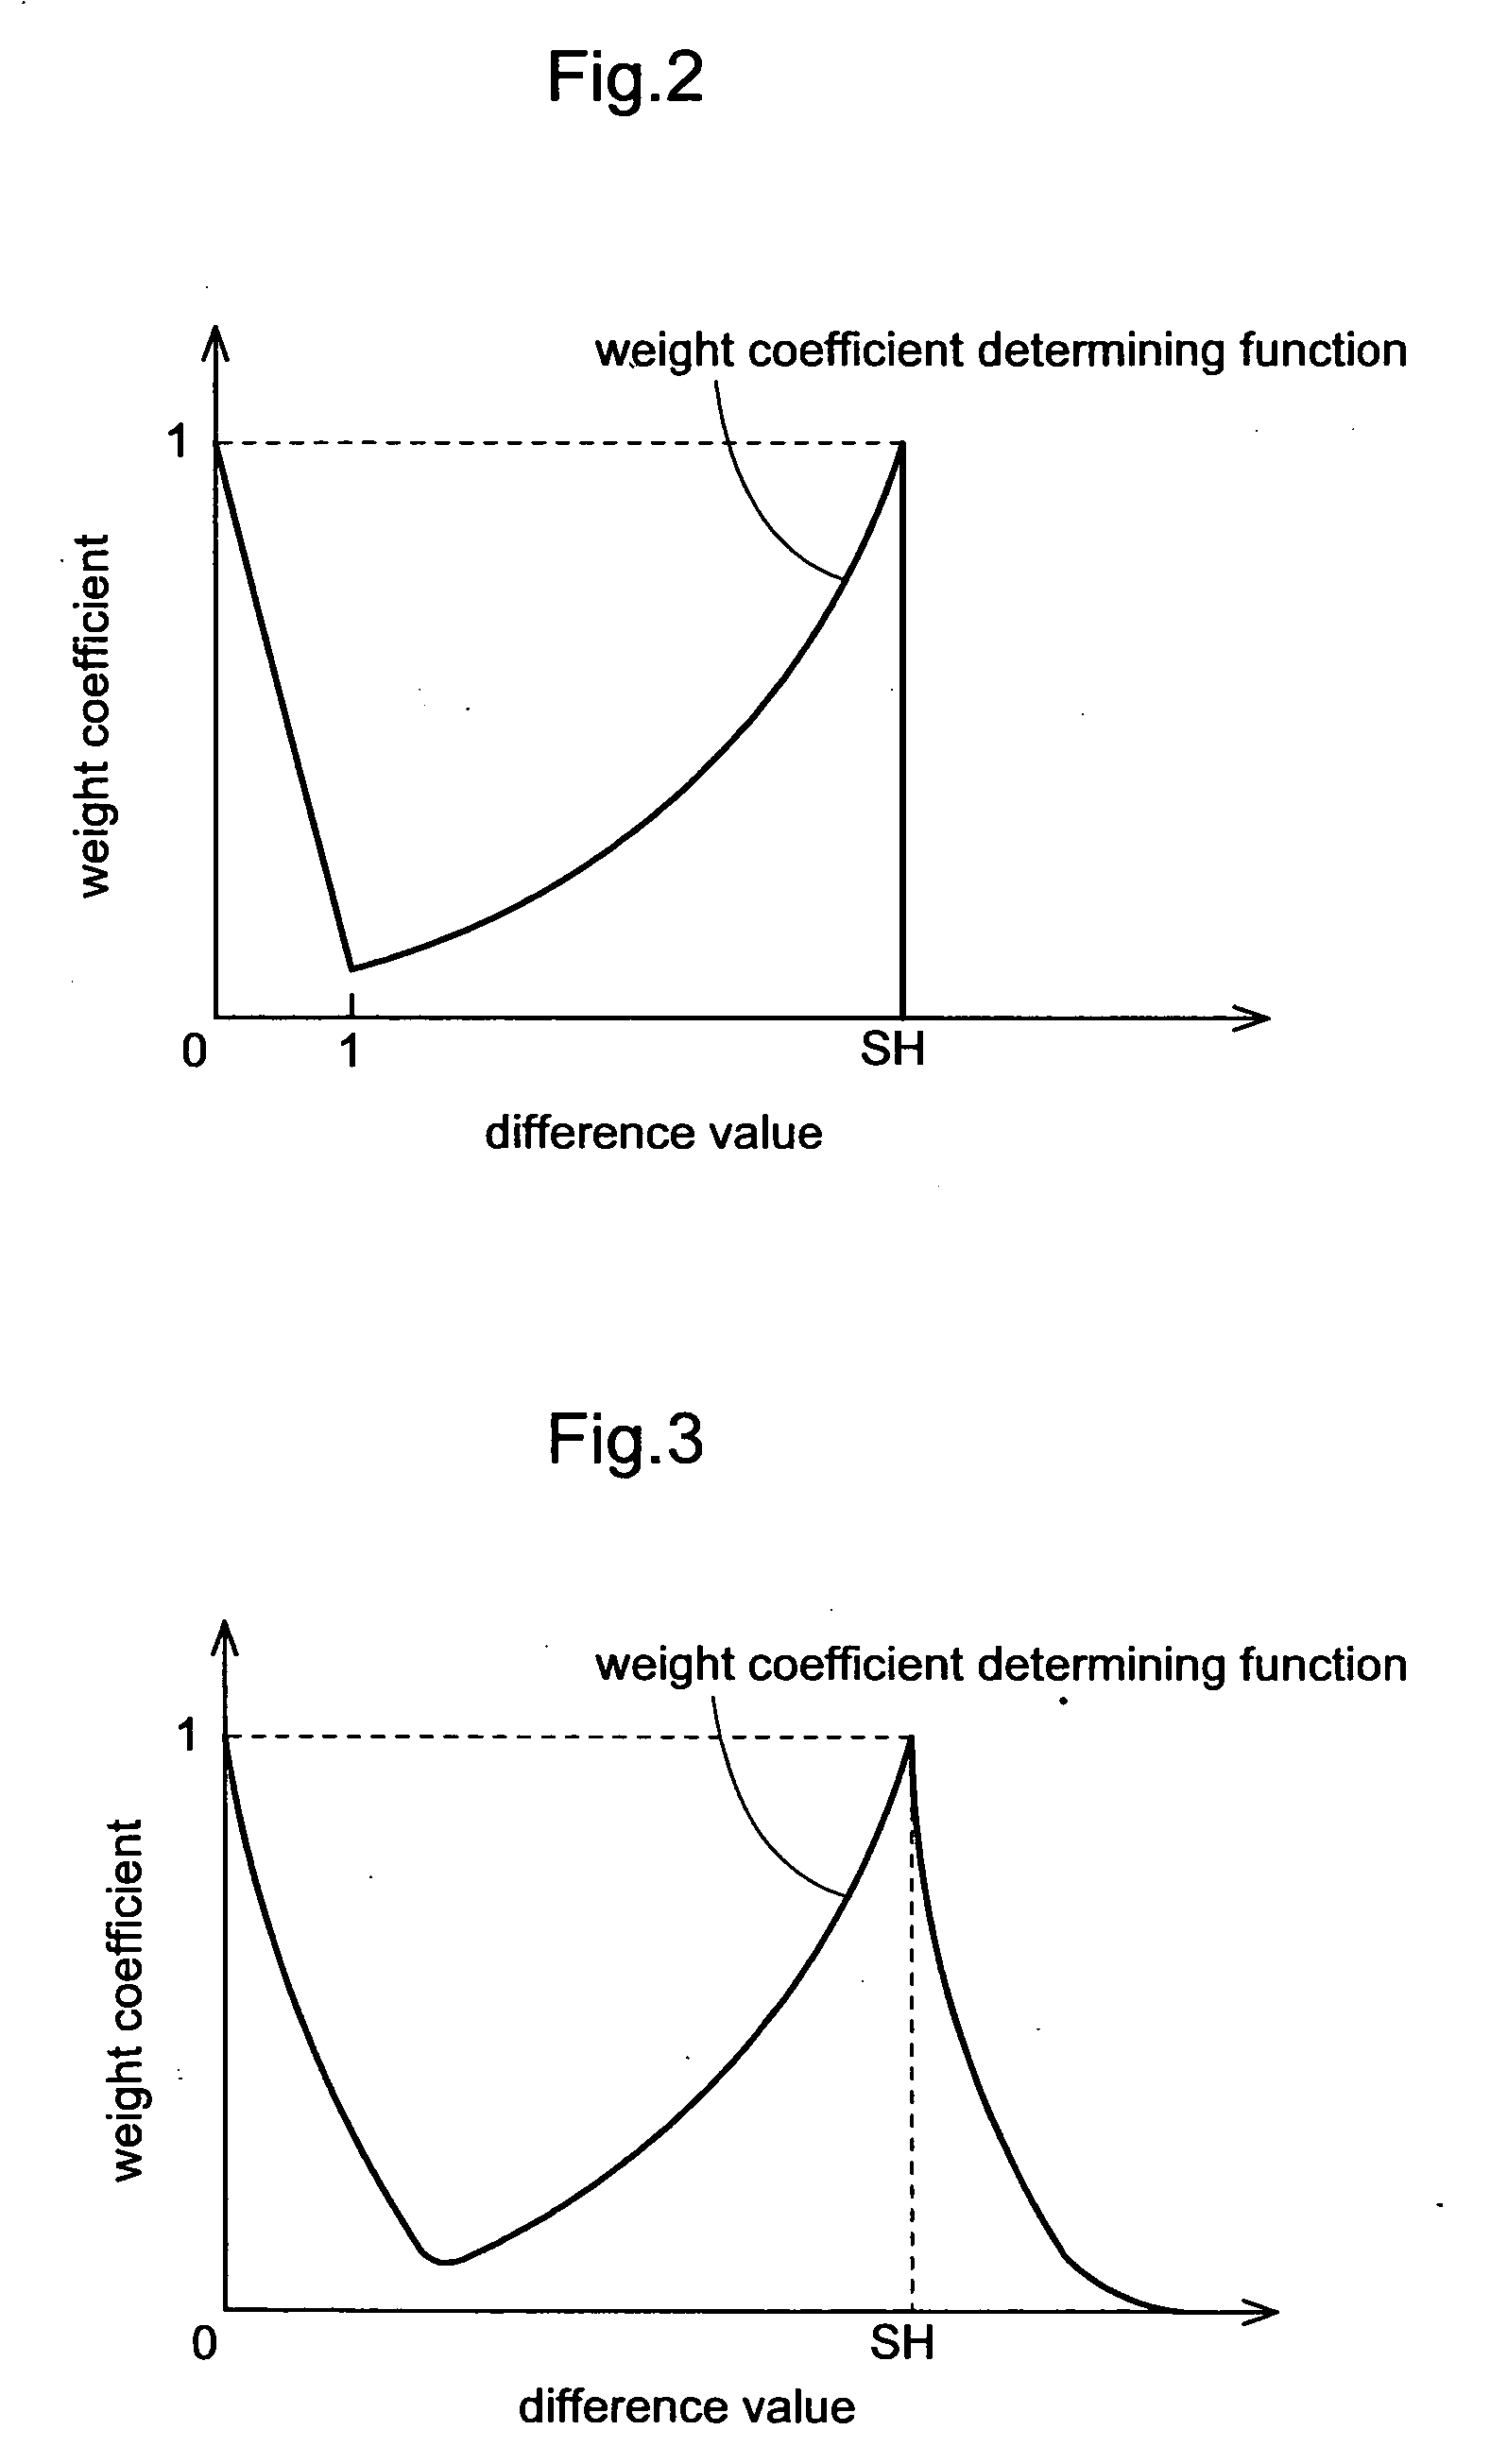 Image processing method and program for restricting granular noise and module for implementing the method